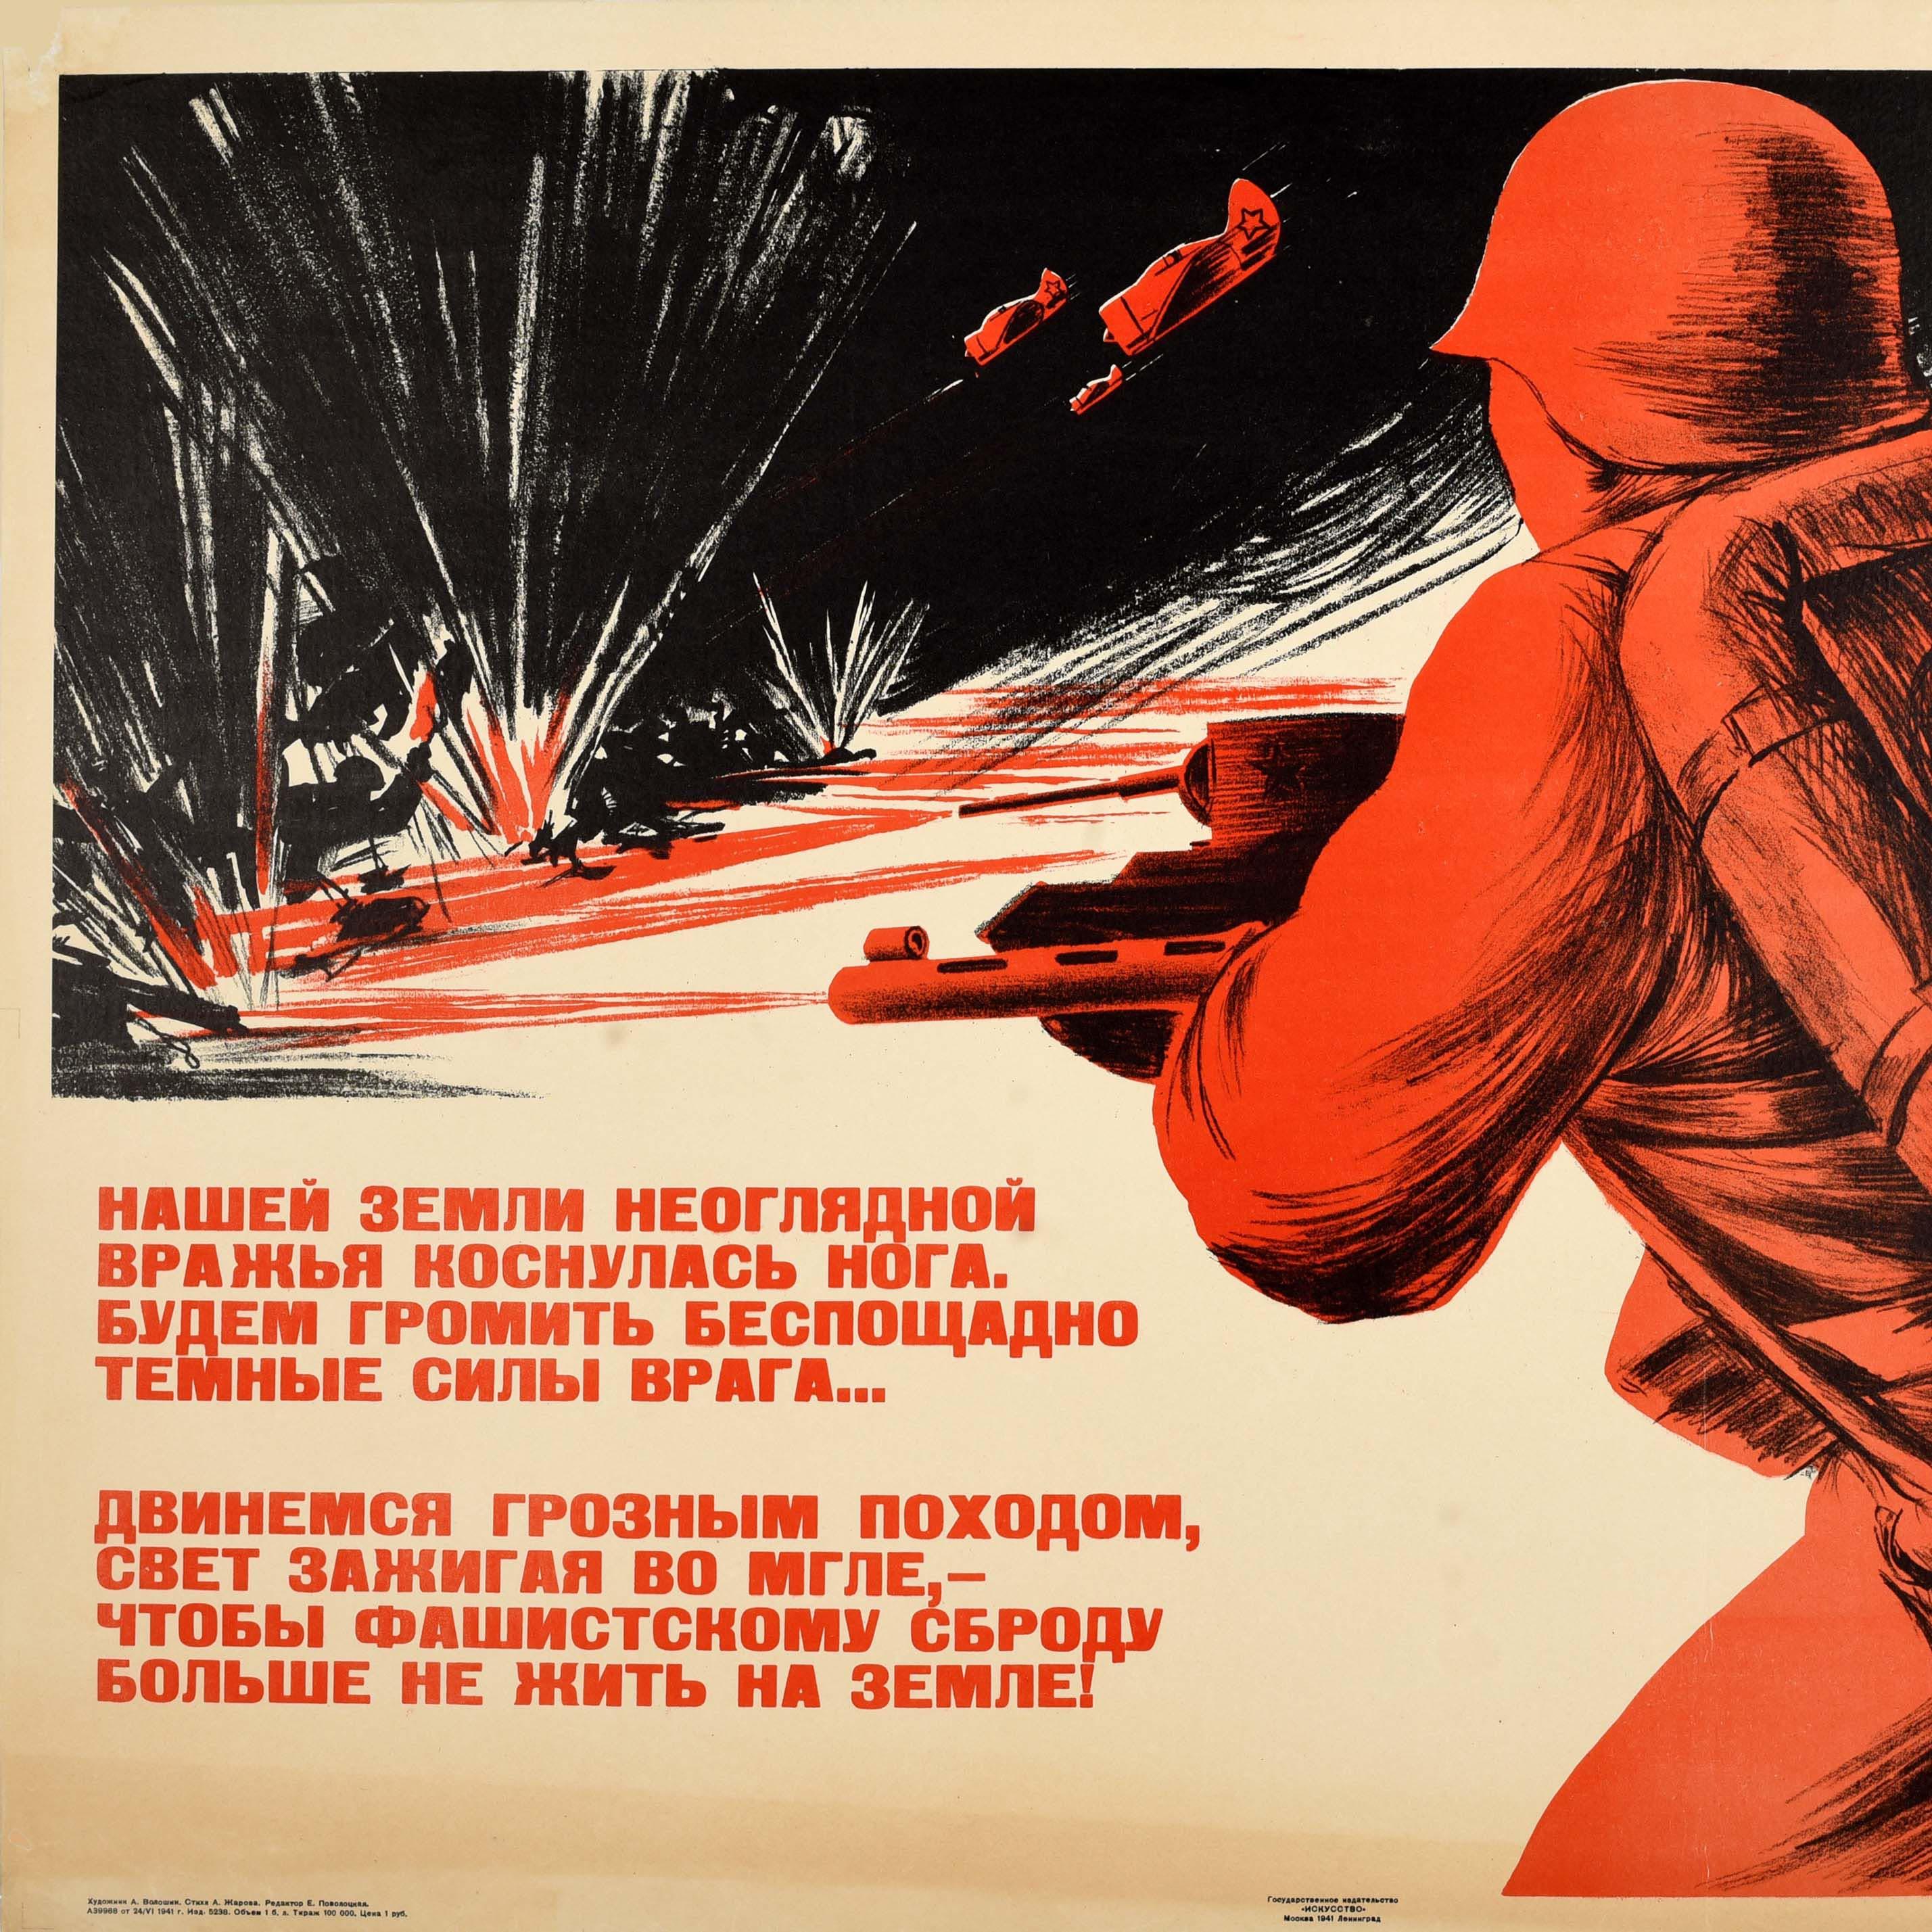 Original vintage Soviet World War Two propaganda poster - Our land has been touched by the infinite enemy We will smash the enemy's dark forces mercilessly ... Let's move on a terrible campaign, lighting a light in the darkness, so that the fascist